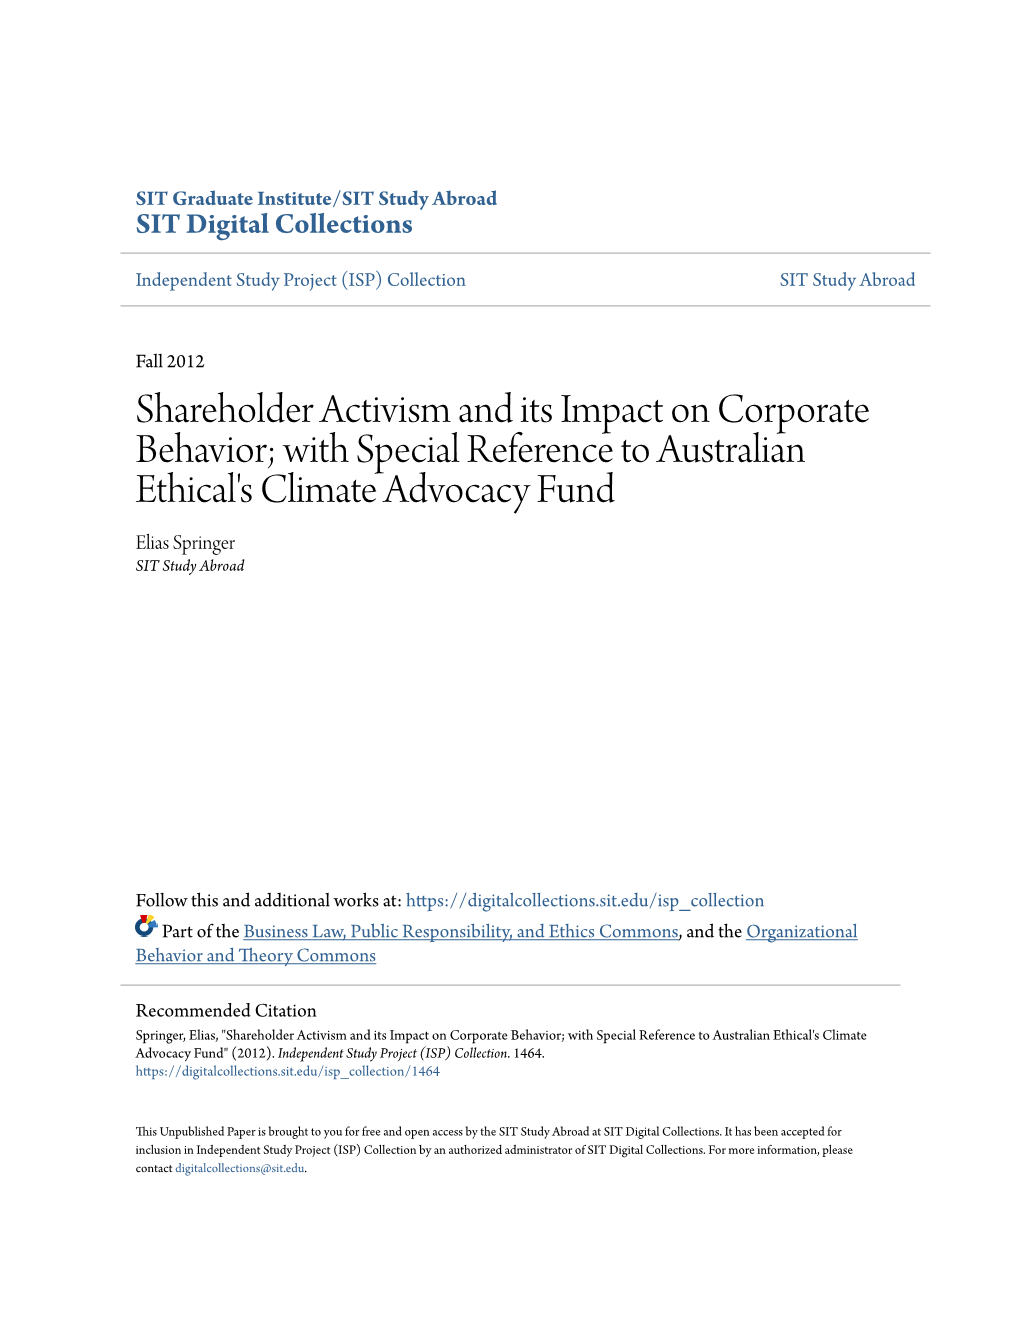 Shareholder Activism and Its Impact on Corporate Behavior; with Special Reference to Australian Ethical's Climate Advocacy Fund Elias Springer SIT Study Abroad